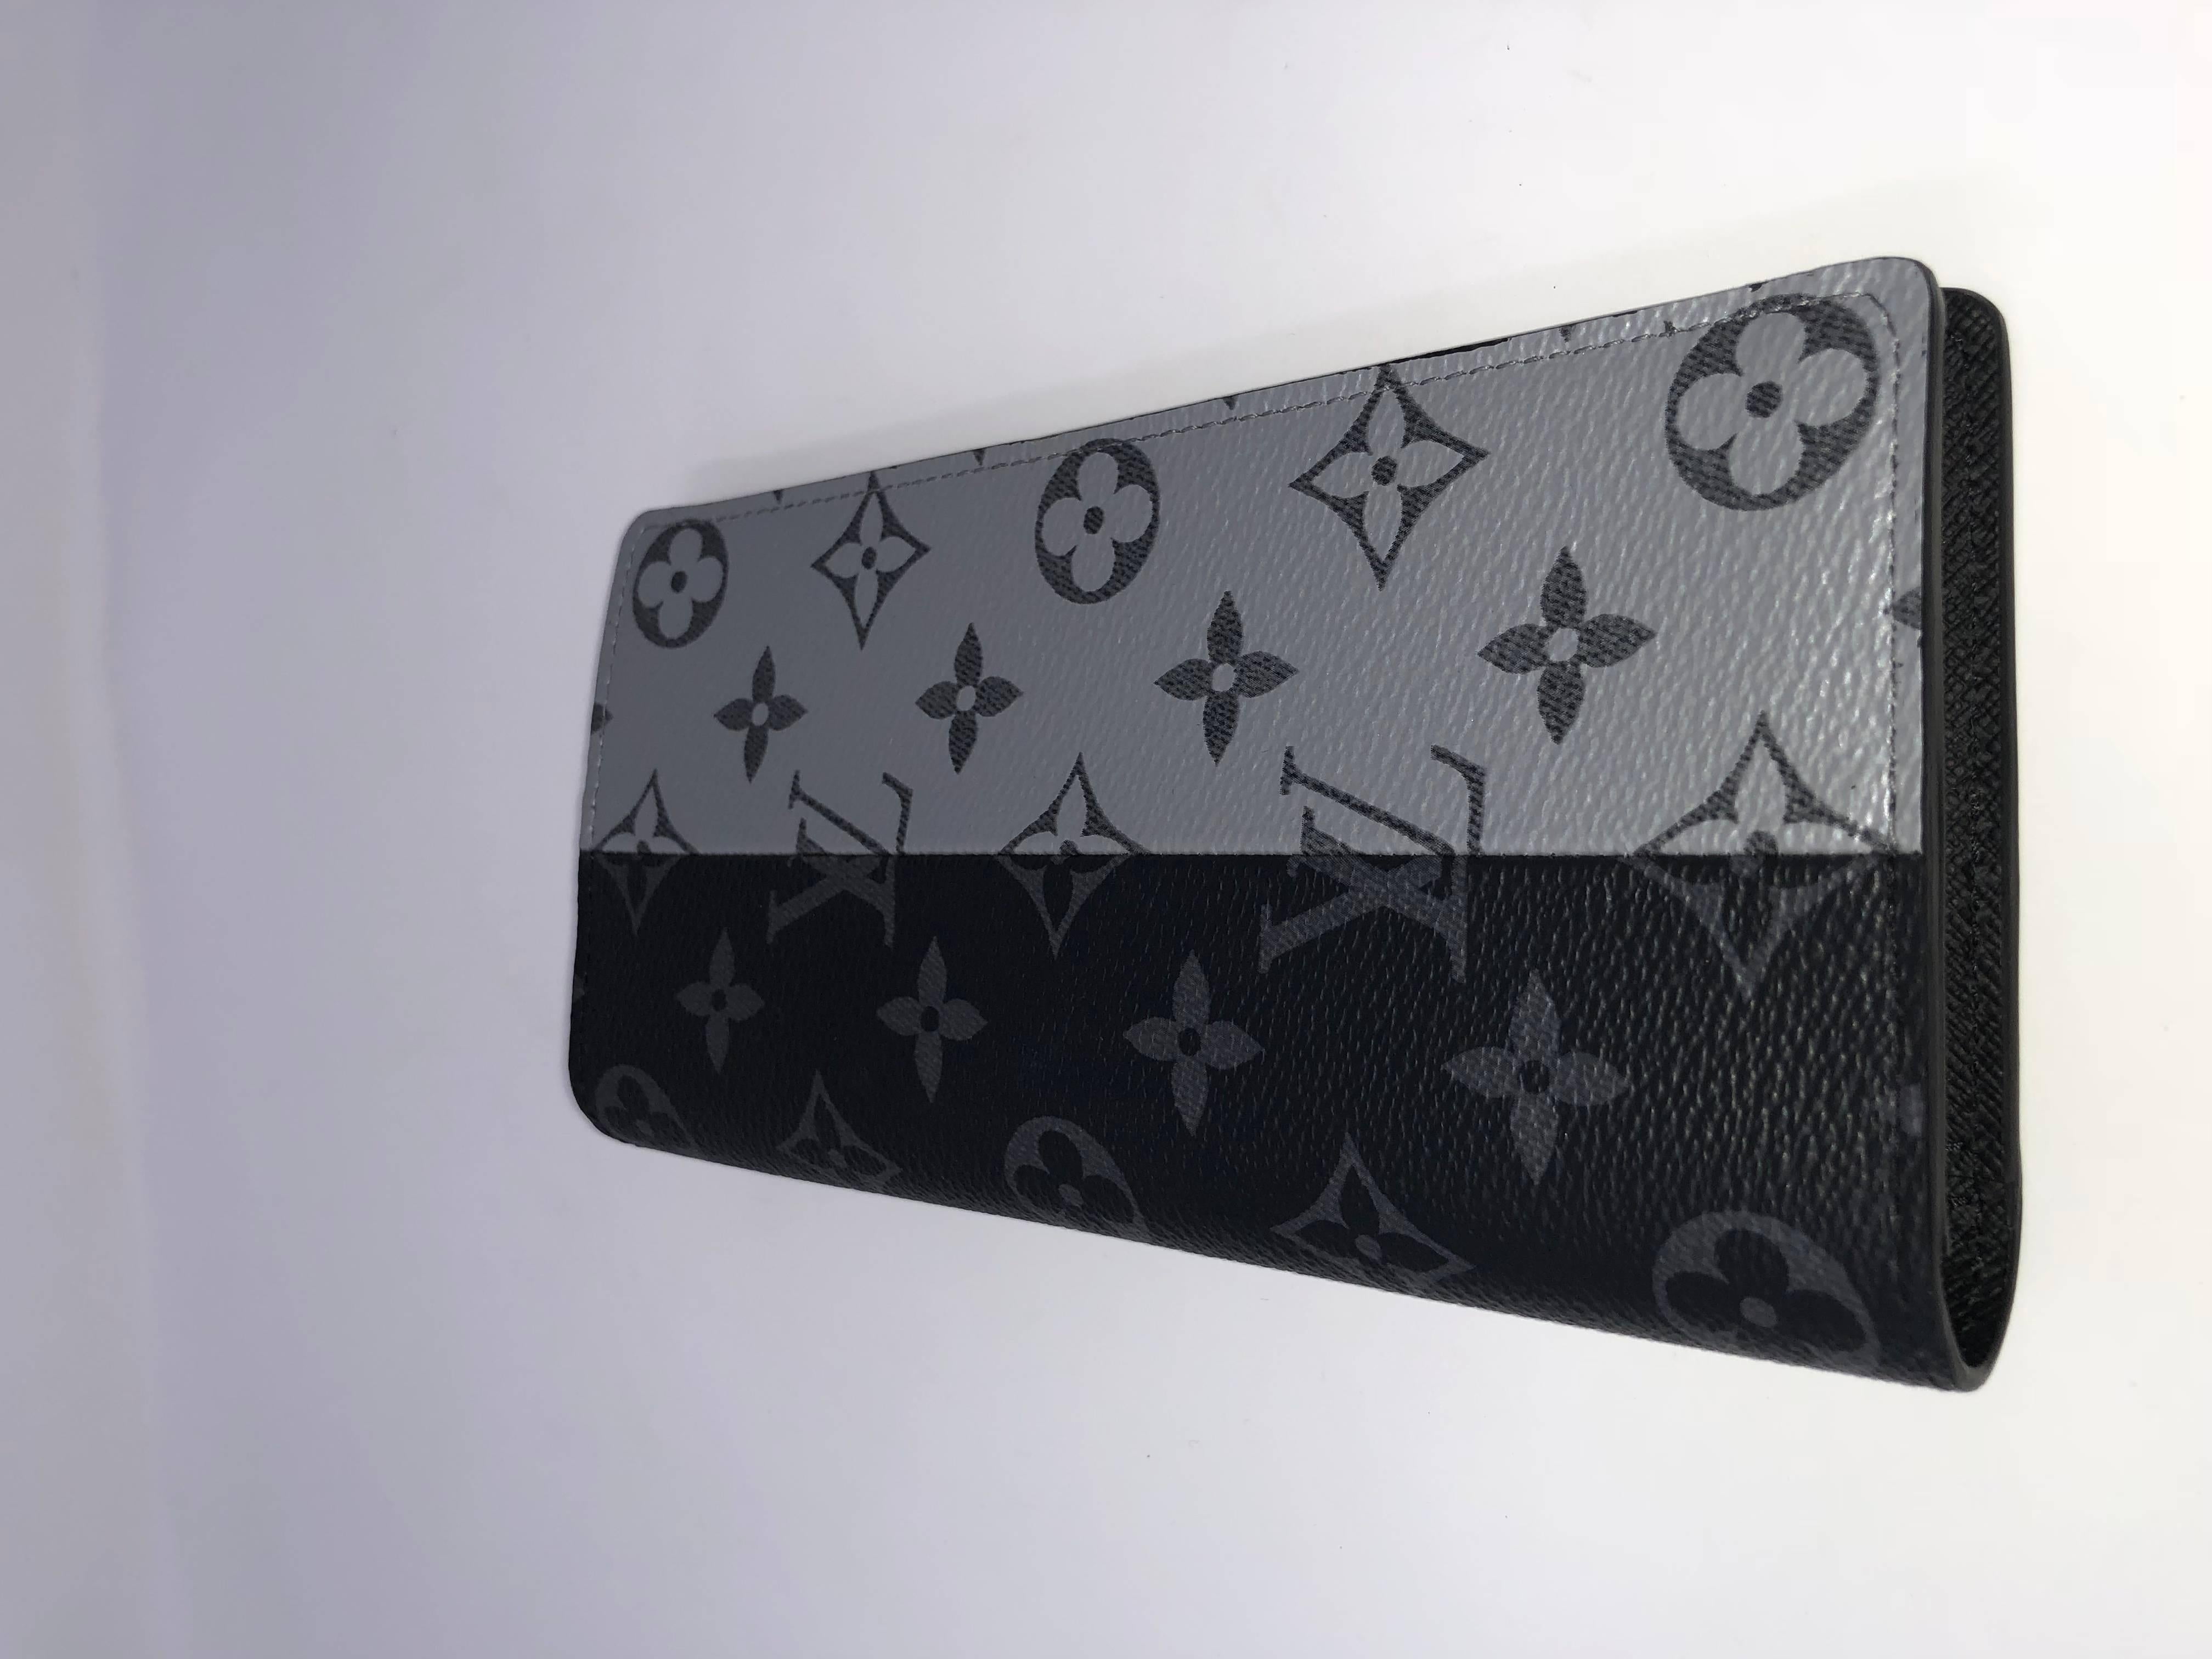 Louis Vuitton Brazza Wallet Eclipse Split Line Spring/ Summer 2018 Kim Jones collection. Brand new and sold out. Limited collection by Kim Jones. Includes dust cover and box. Guaranteed authentic. 